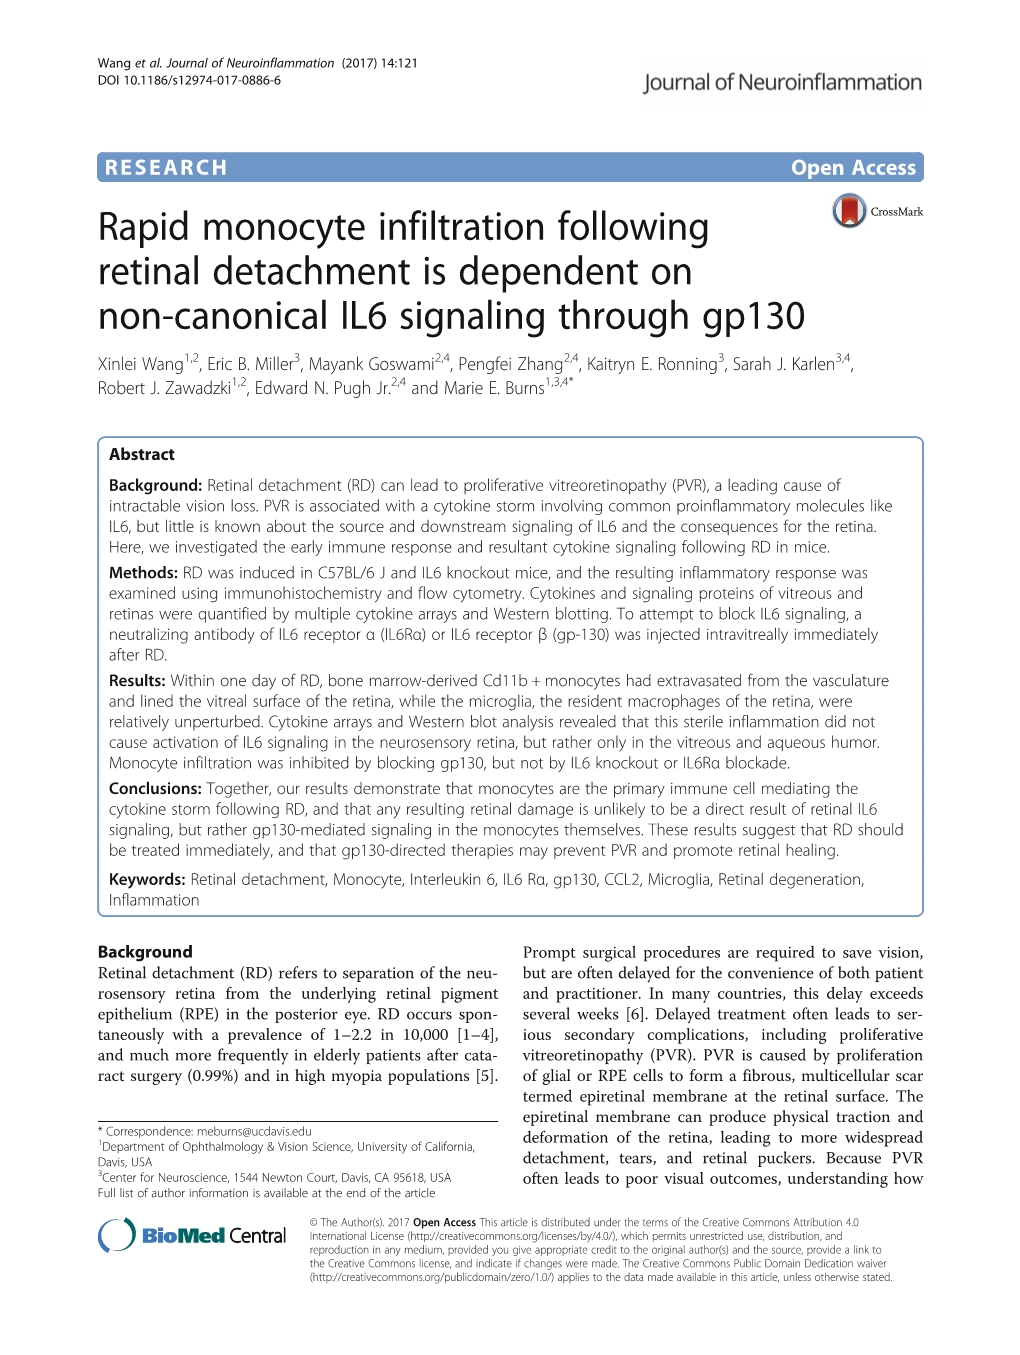 Rapid Monocyte Infiltration Following Retinal Detachment Is Dependent on Non-Canonical IL6 Signaling Through Gp130 Xinlei Wang1,2, Eric B